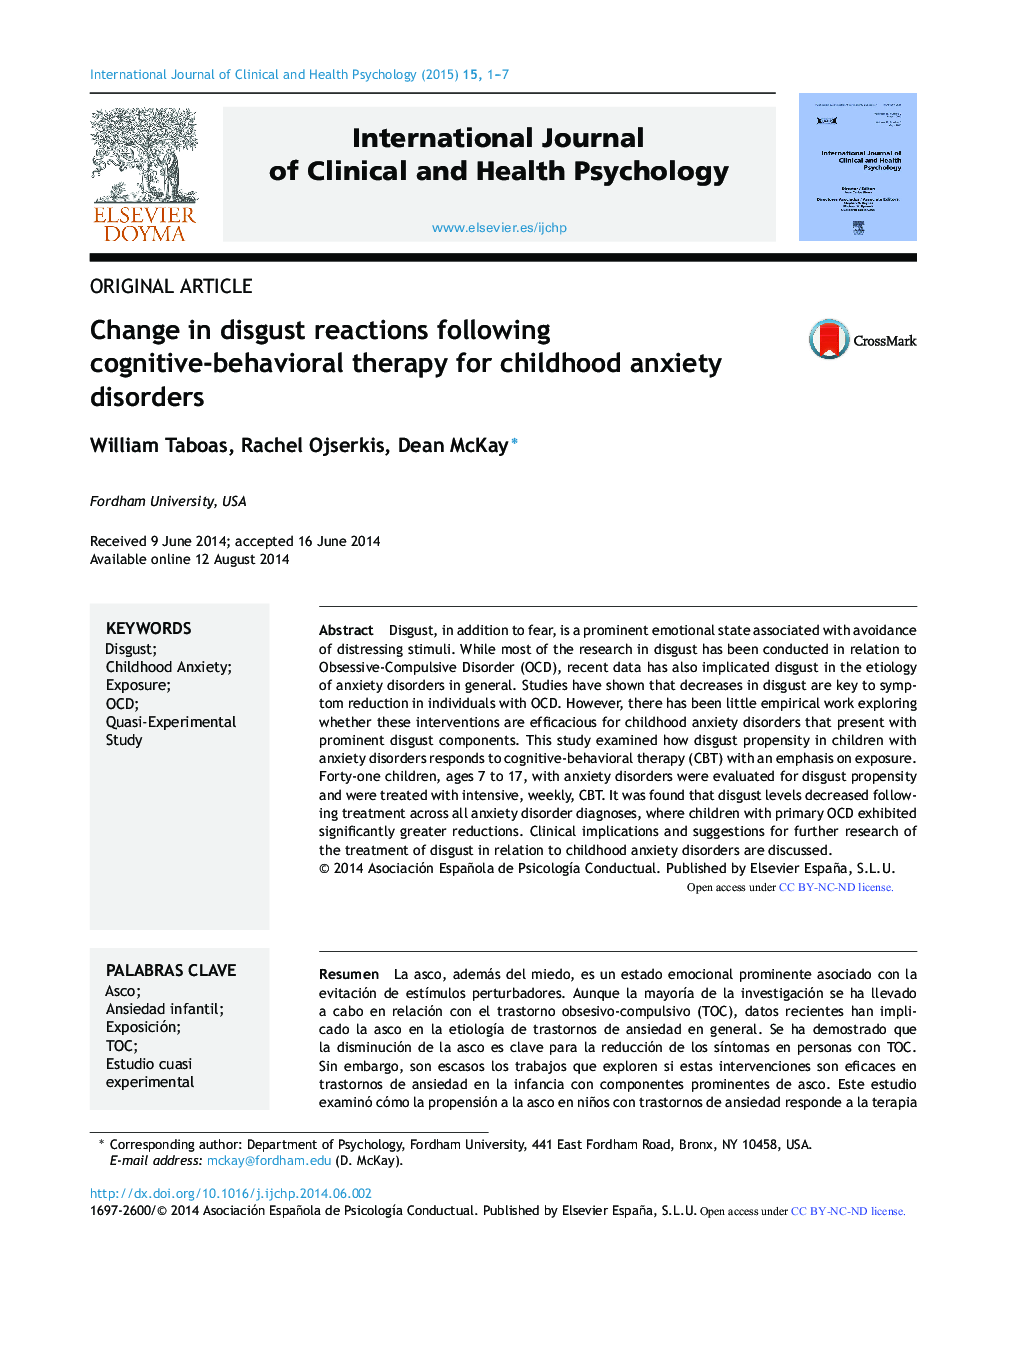 Change in disgust reactions following cognitive-behavioral therapy for childhood anxiety disorders